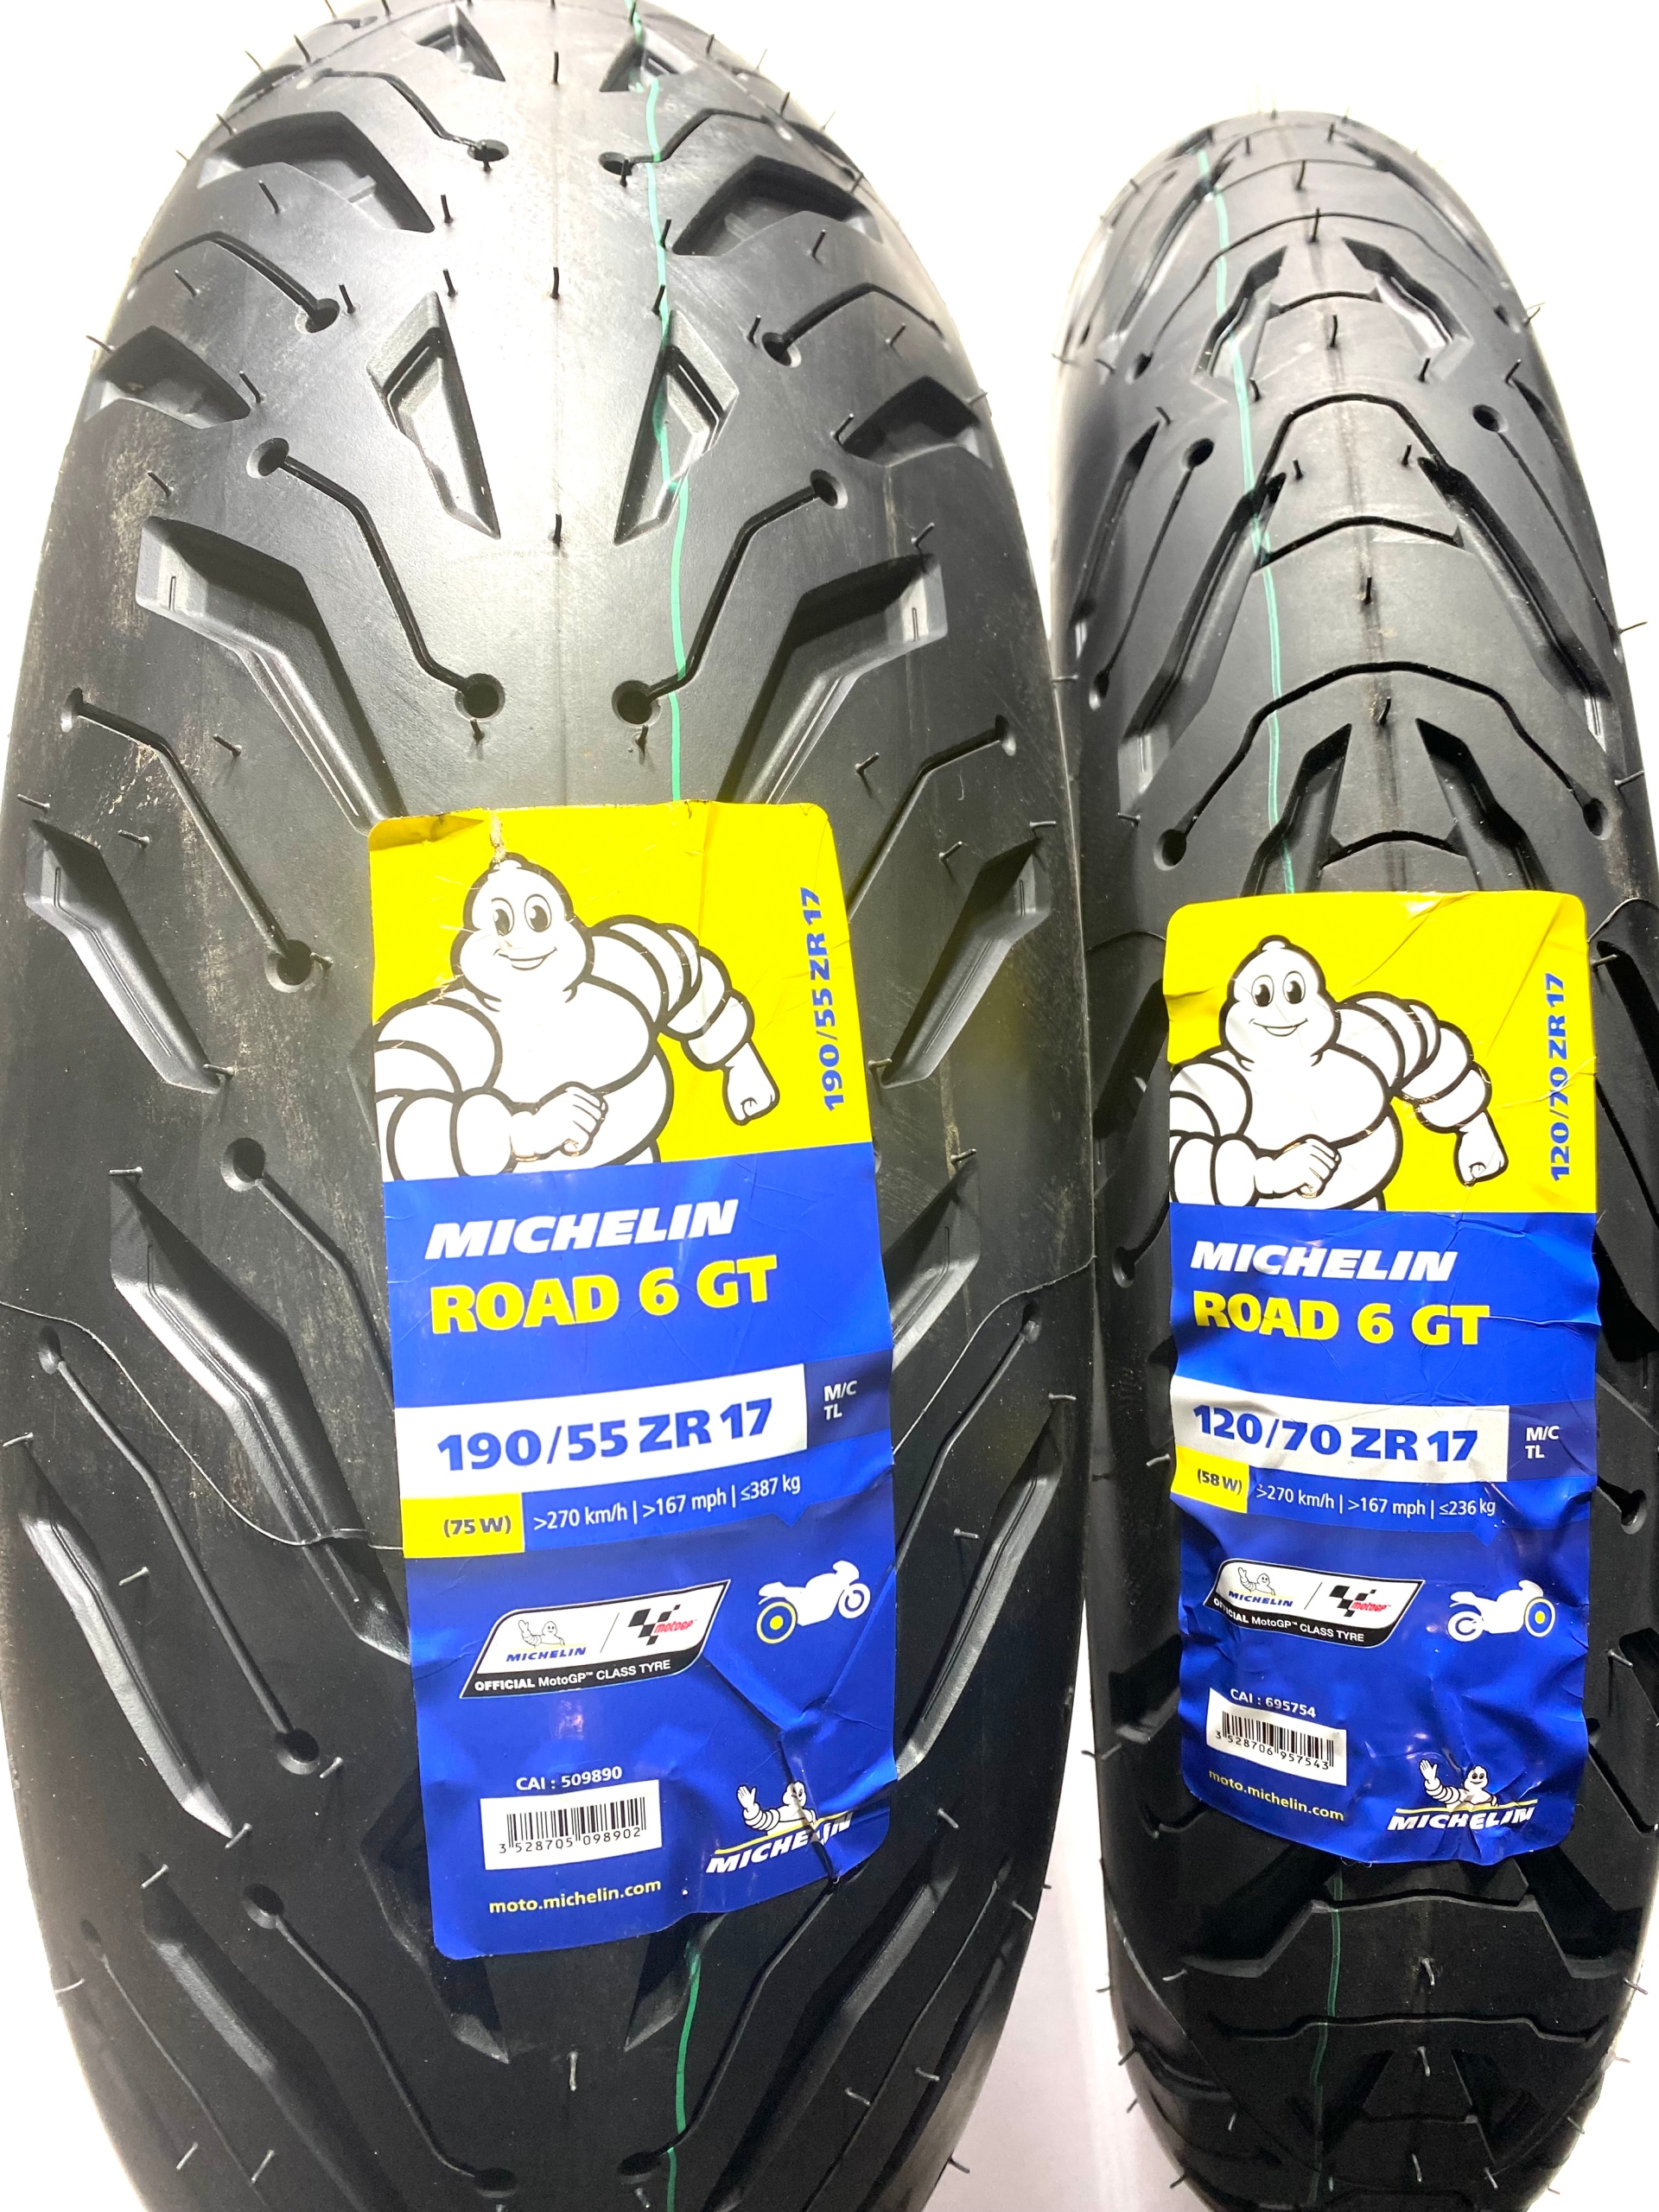 TIRES MICHELIN ROAD 6 GT 120/70/17 190/55/17 23R